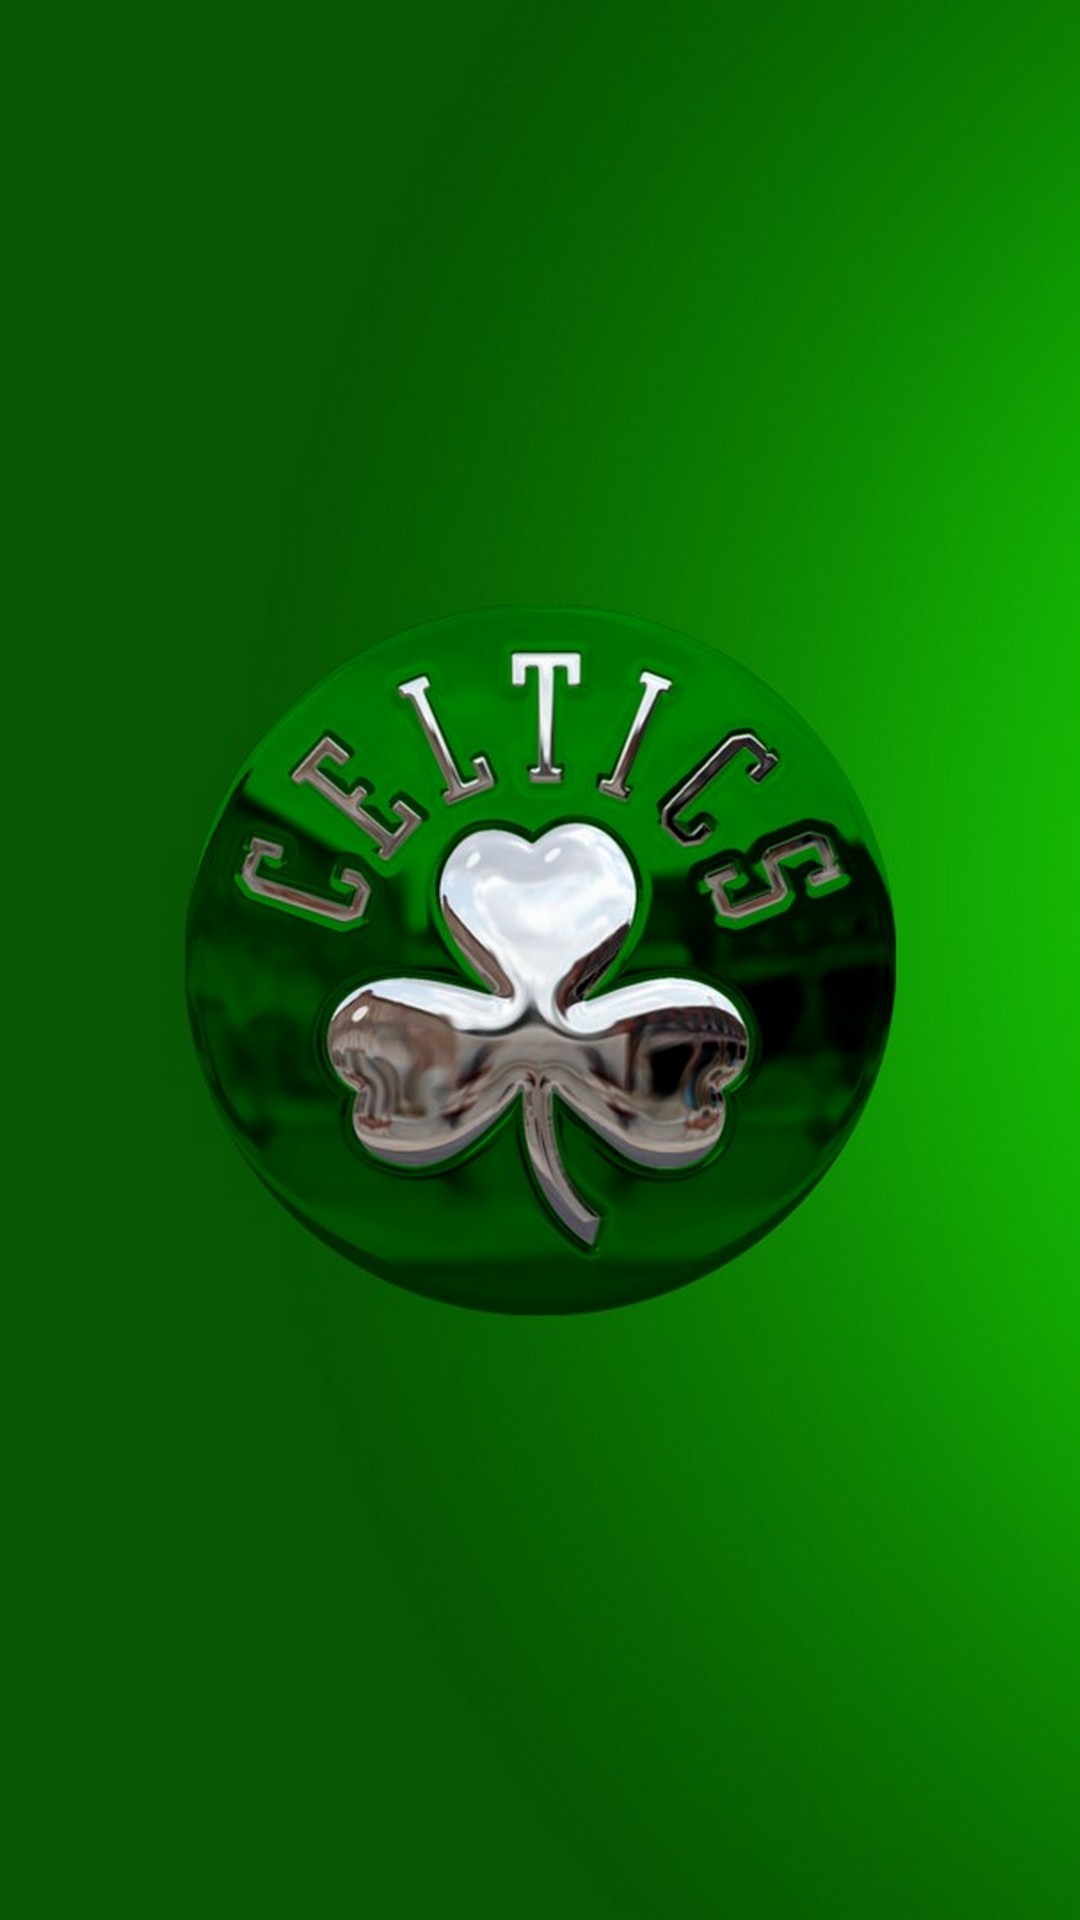 Boston Celtics Wallpaper For Android with resolution 1080X1920 pixel. You can make this wallpaper for your Android backgrounds, Tablet, Smartphones Screensavers and Mobile Phone Lock Screen